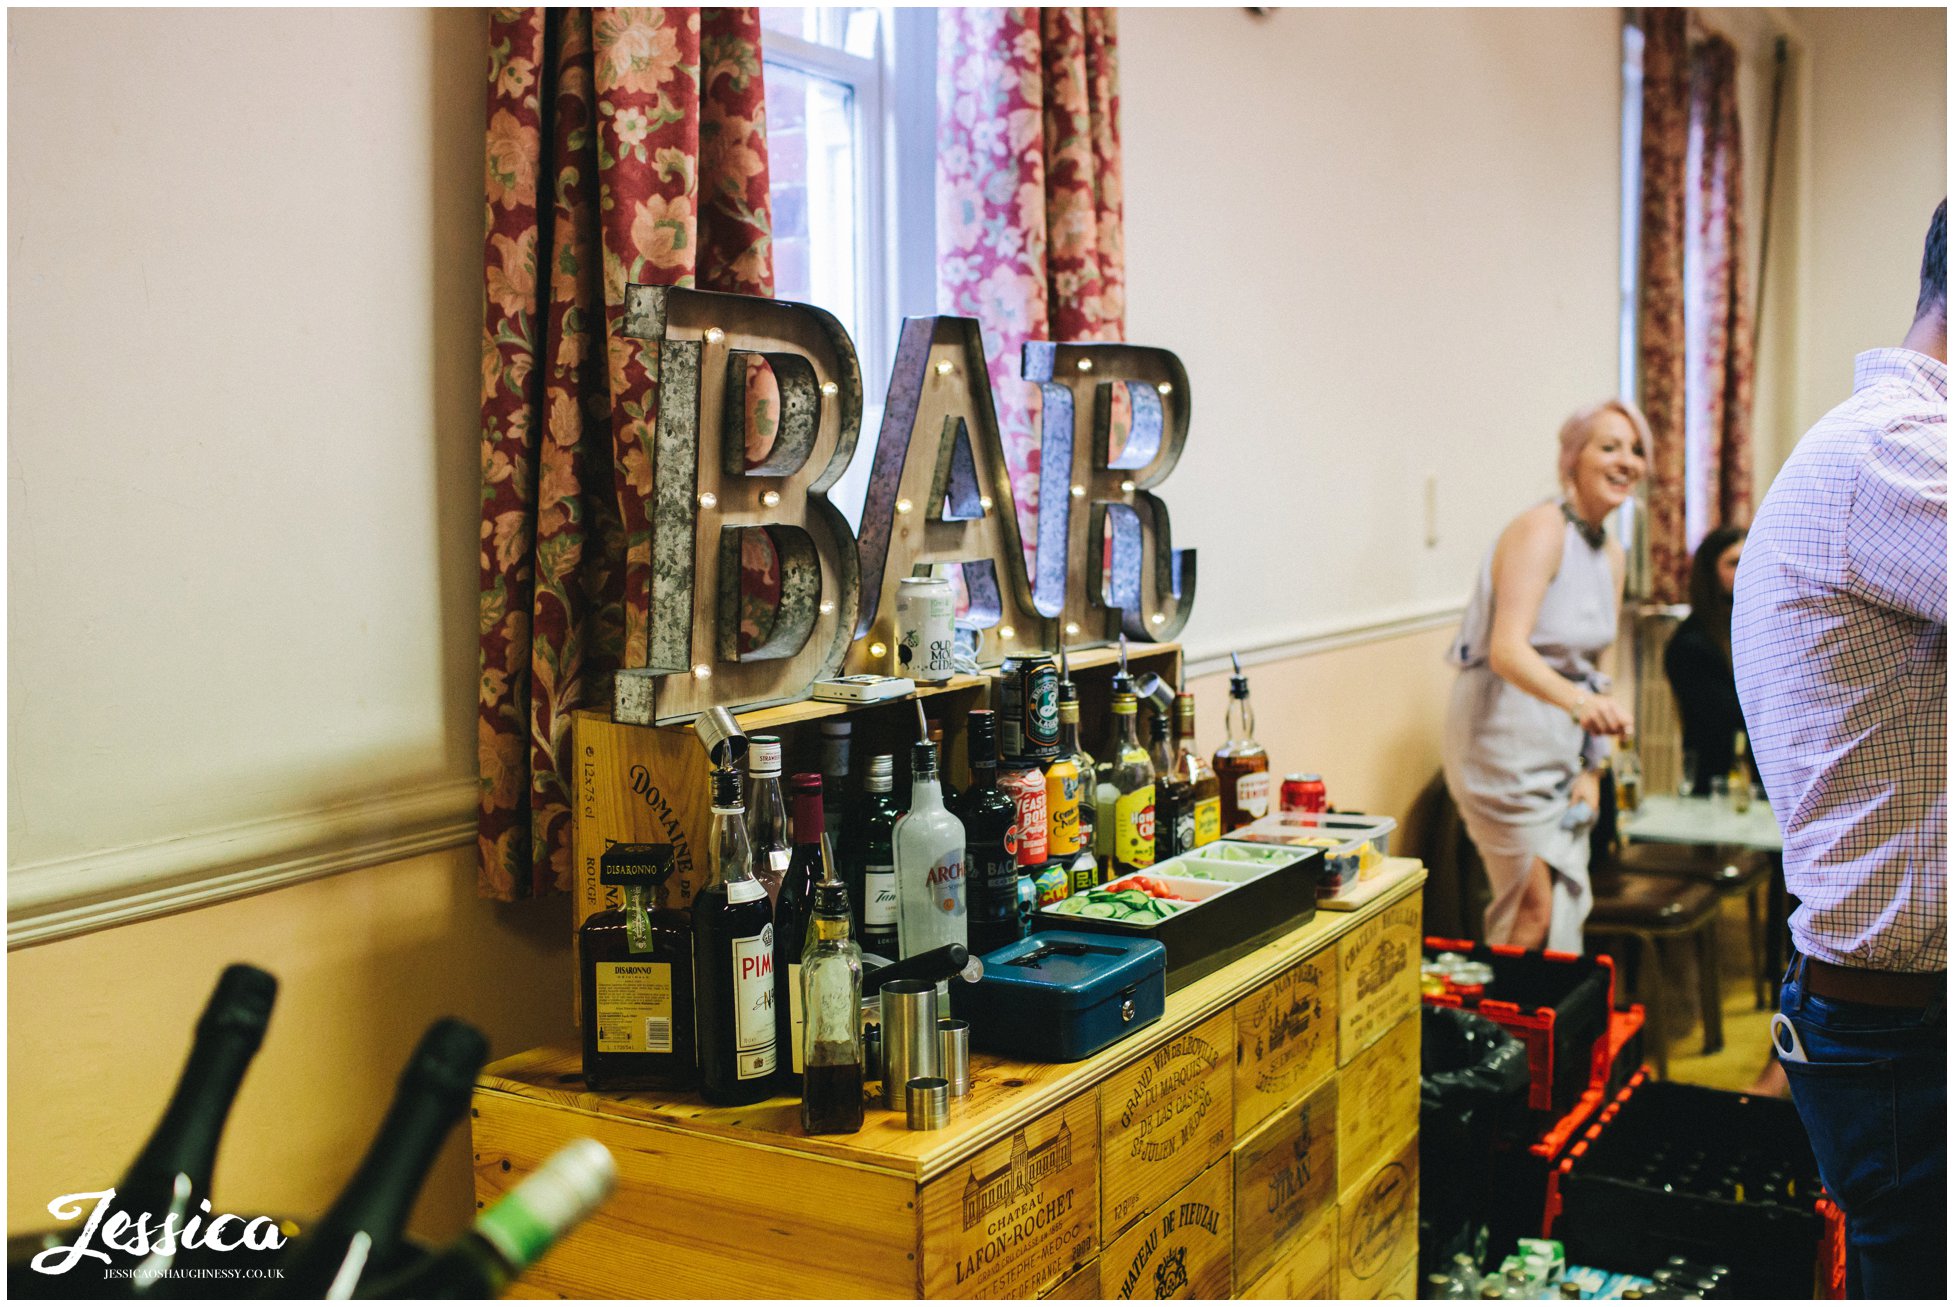 DIY style bar set up in a village hall in manchester